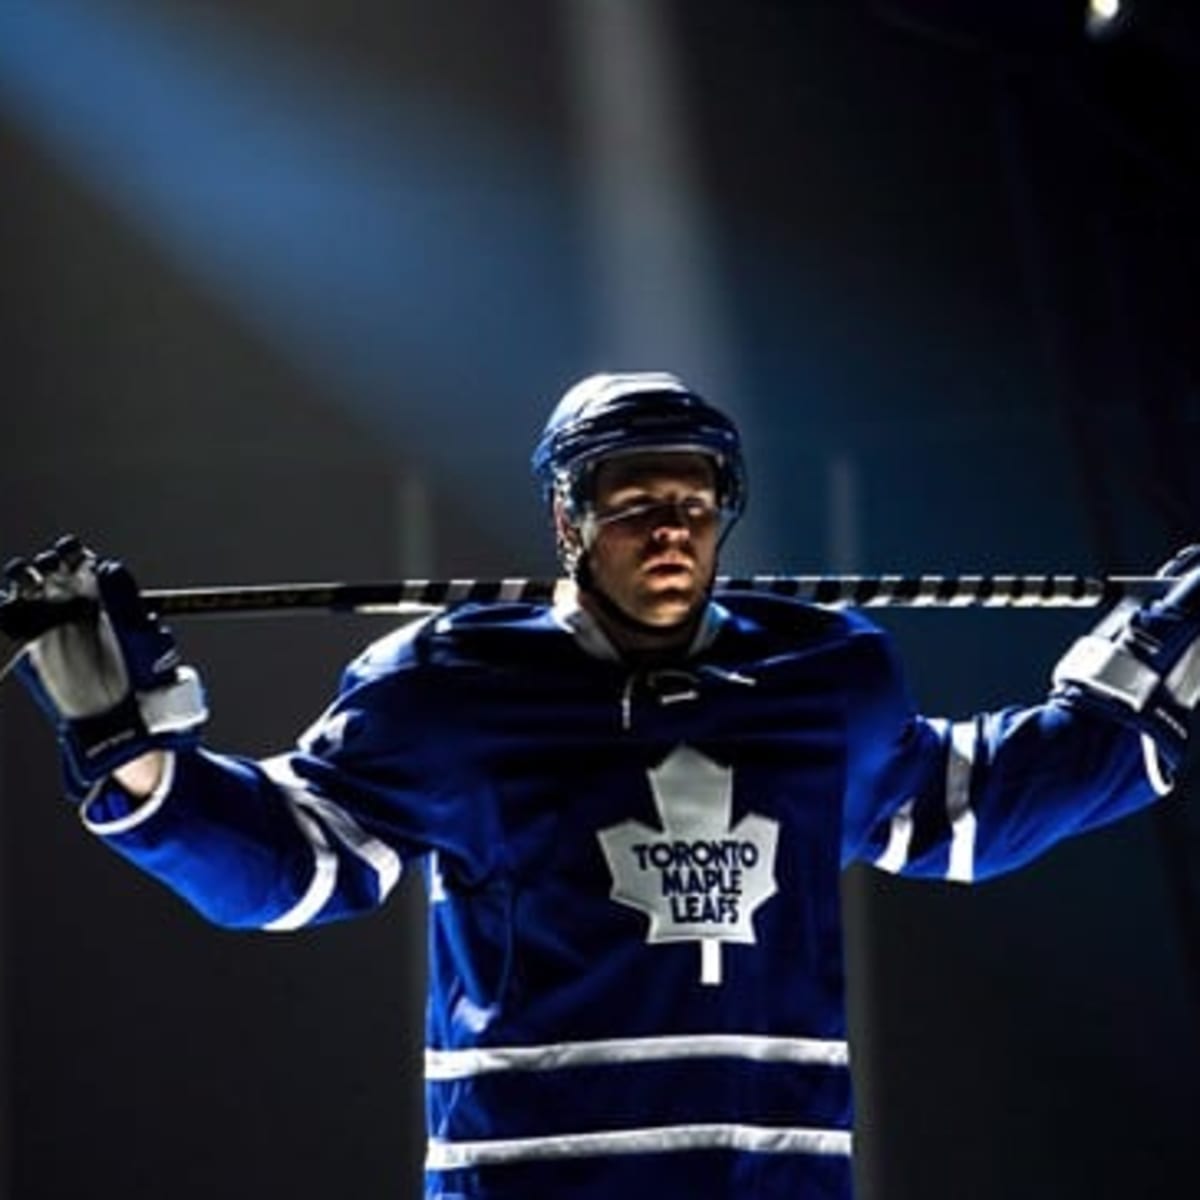 Leafs lock up Kessel with $64 million extension